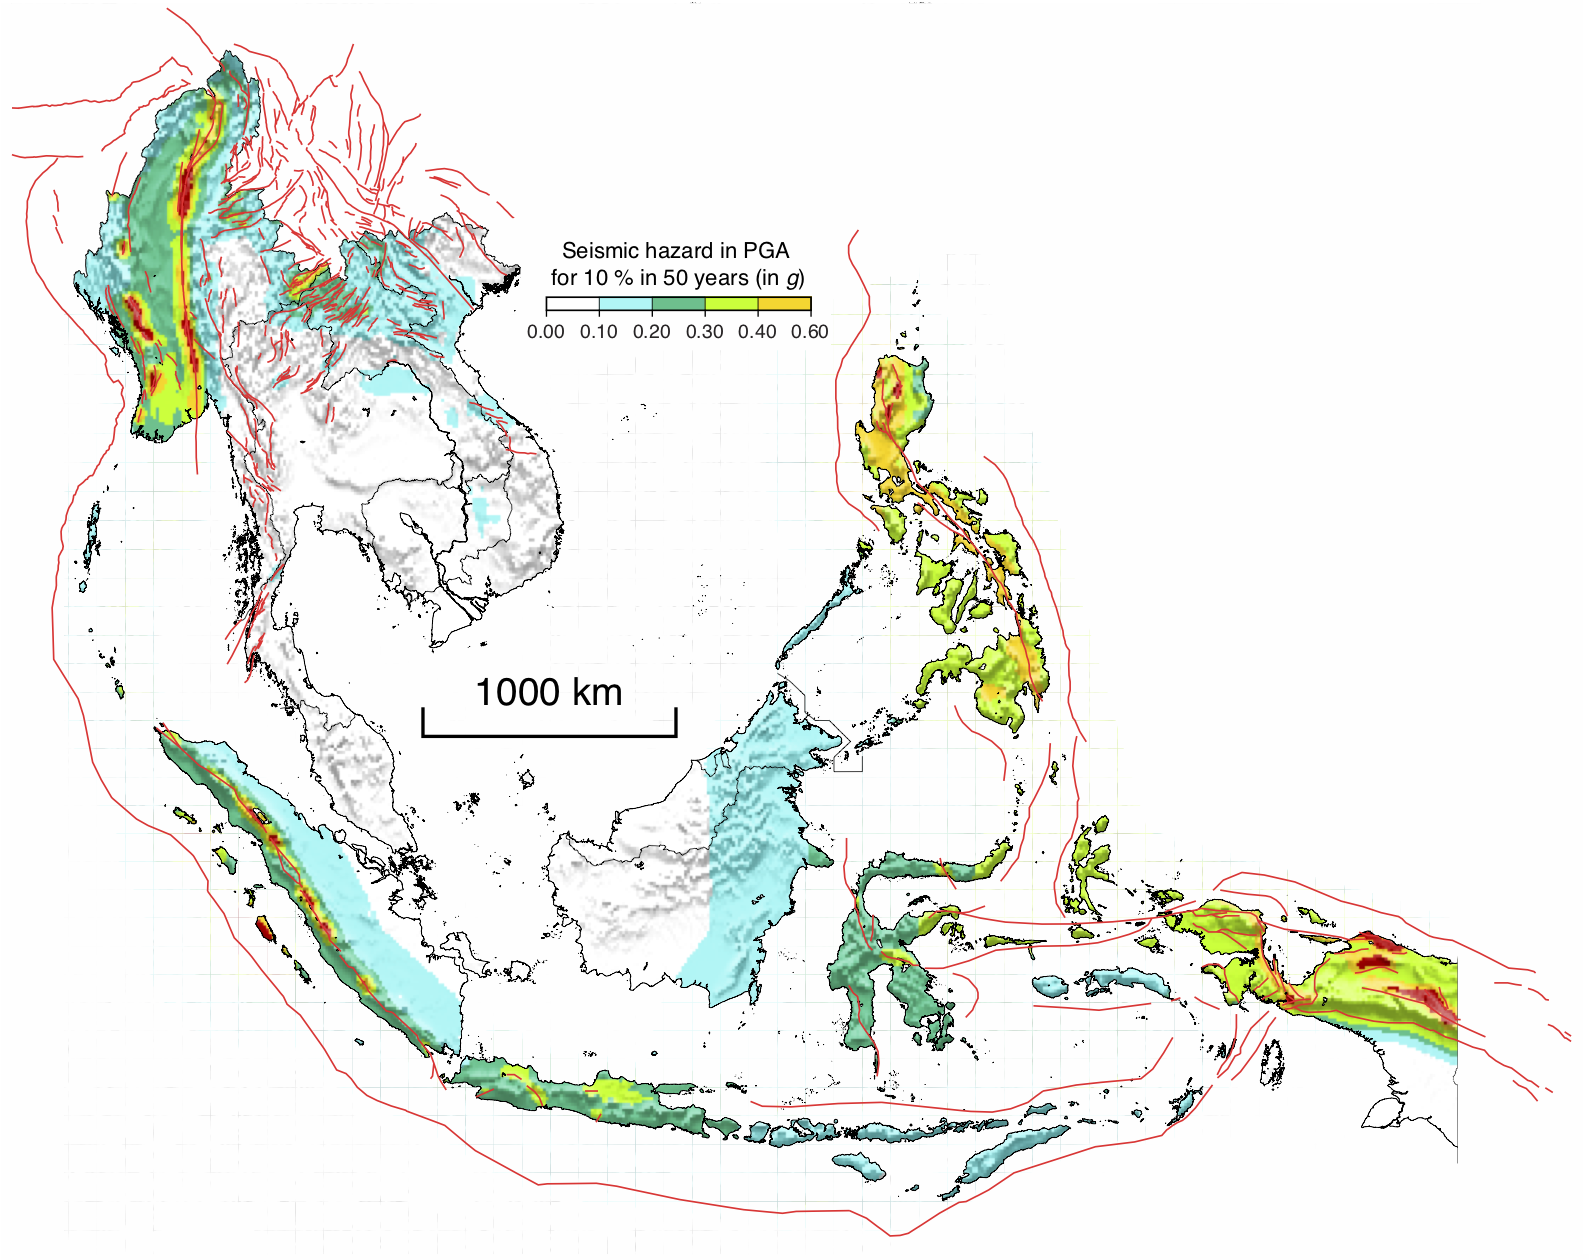 Avoiding the areas at risk is an important aspect of disaster risk reduction. This map shows the different levels of seismic hazards in South East Asia, a region prone to earthquakes due to its tectonic settings (Source: Wang Yu/ Earth Observatory of Singapore)